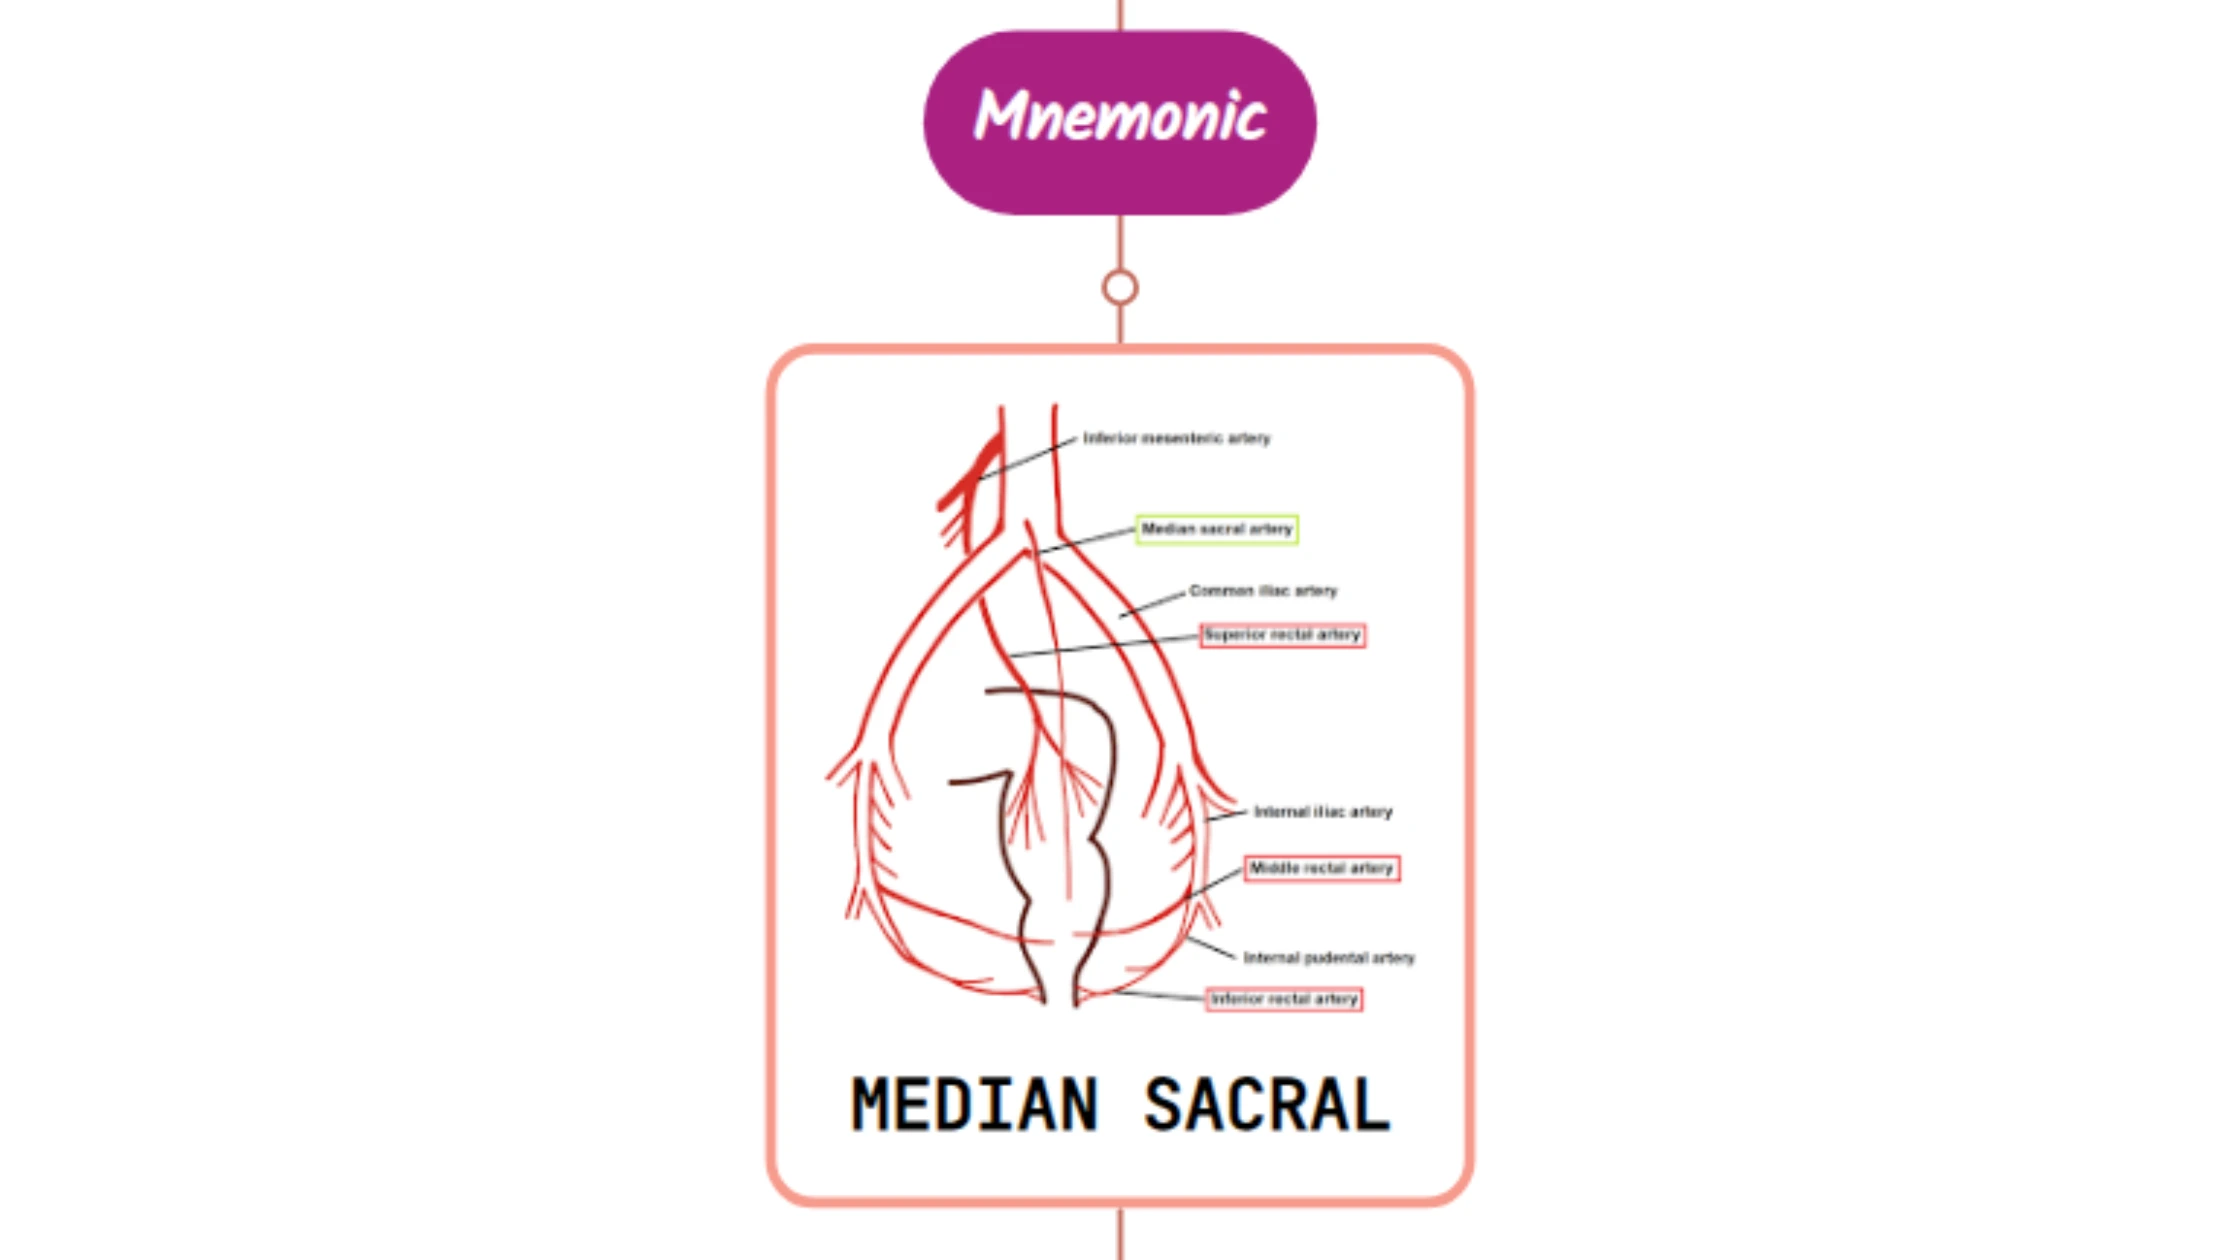 You are currently viewing Median Sacral Artery- Mnemonic [ NEVER FORGET AGAIN ]